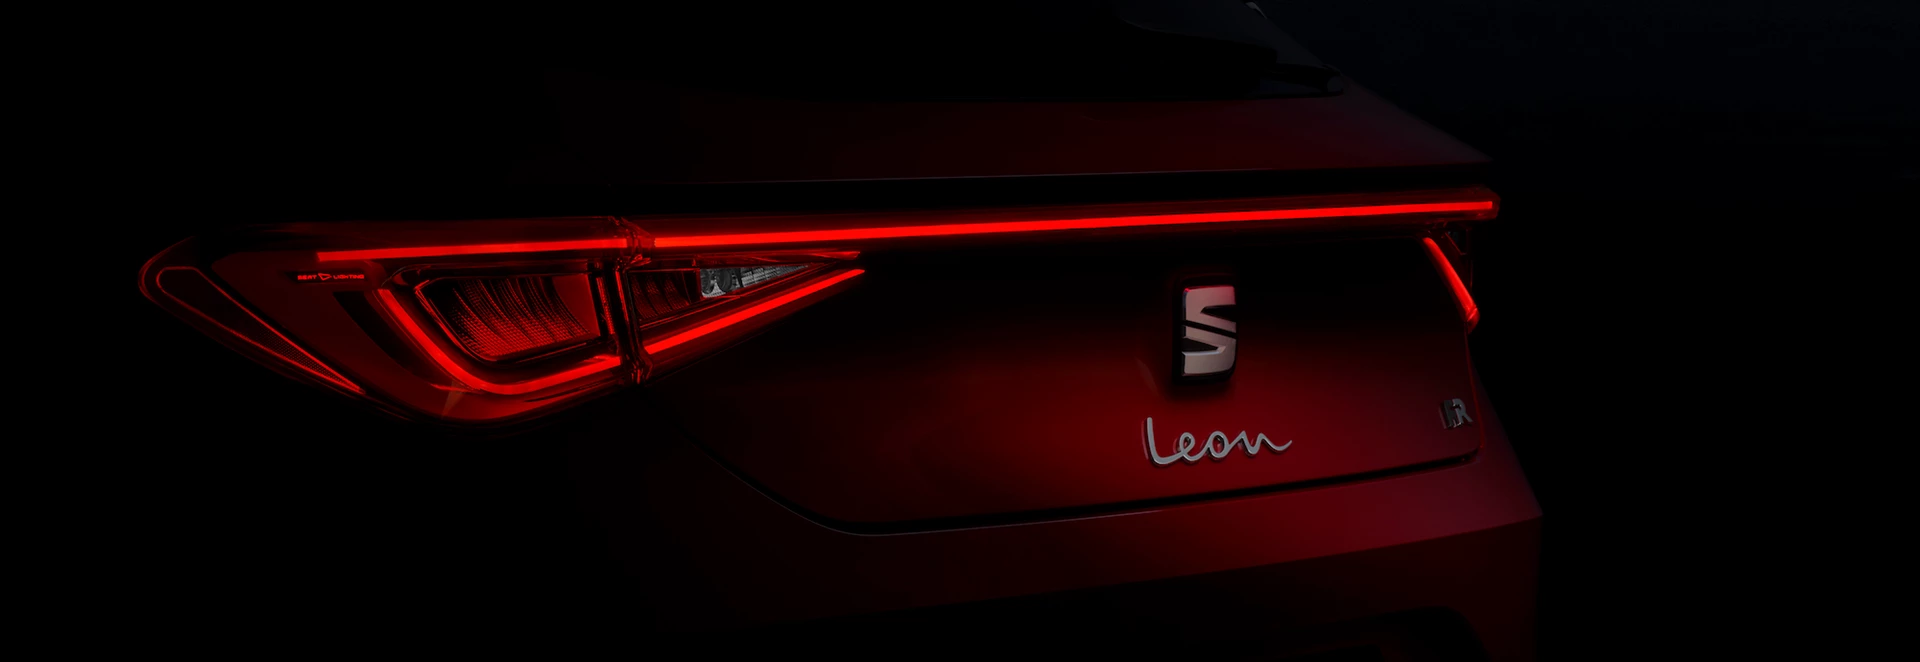 2020 Seat Leon teased further ahead of late-January reveal